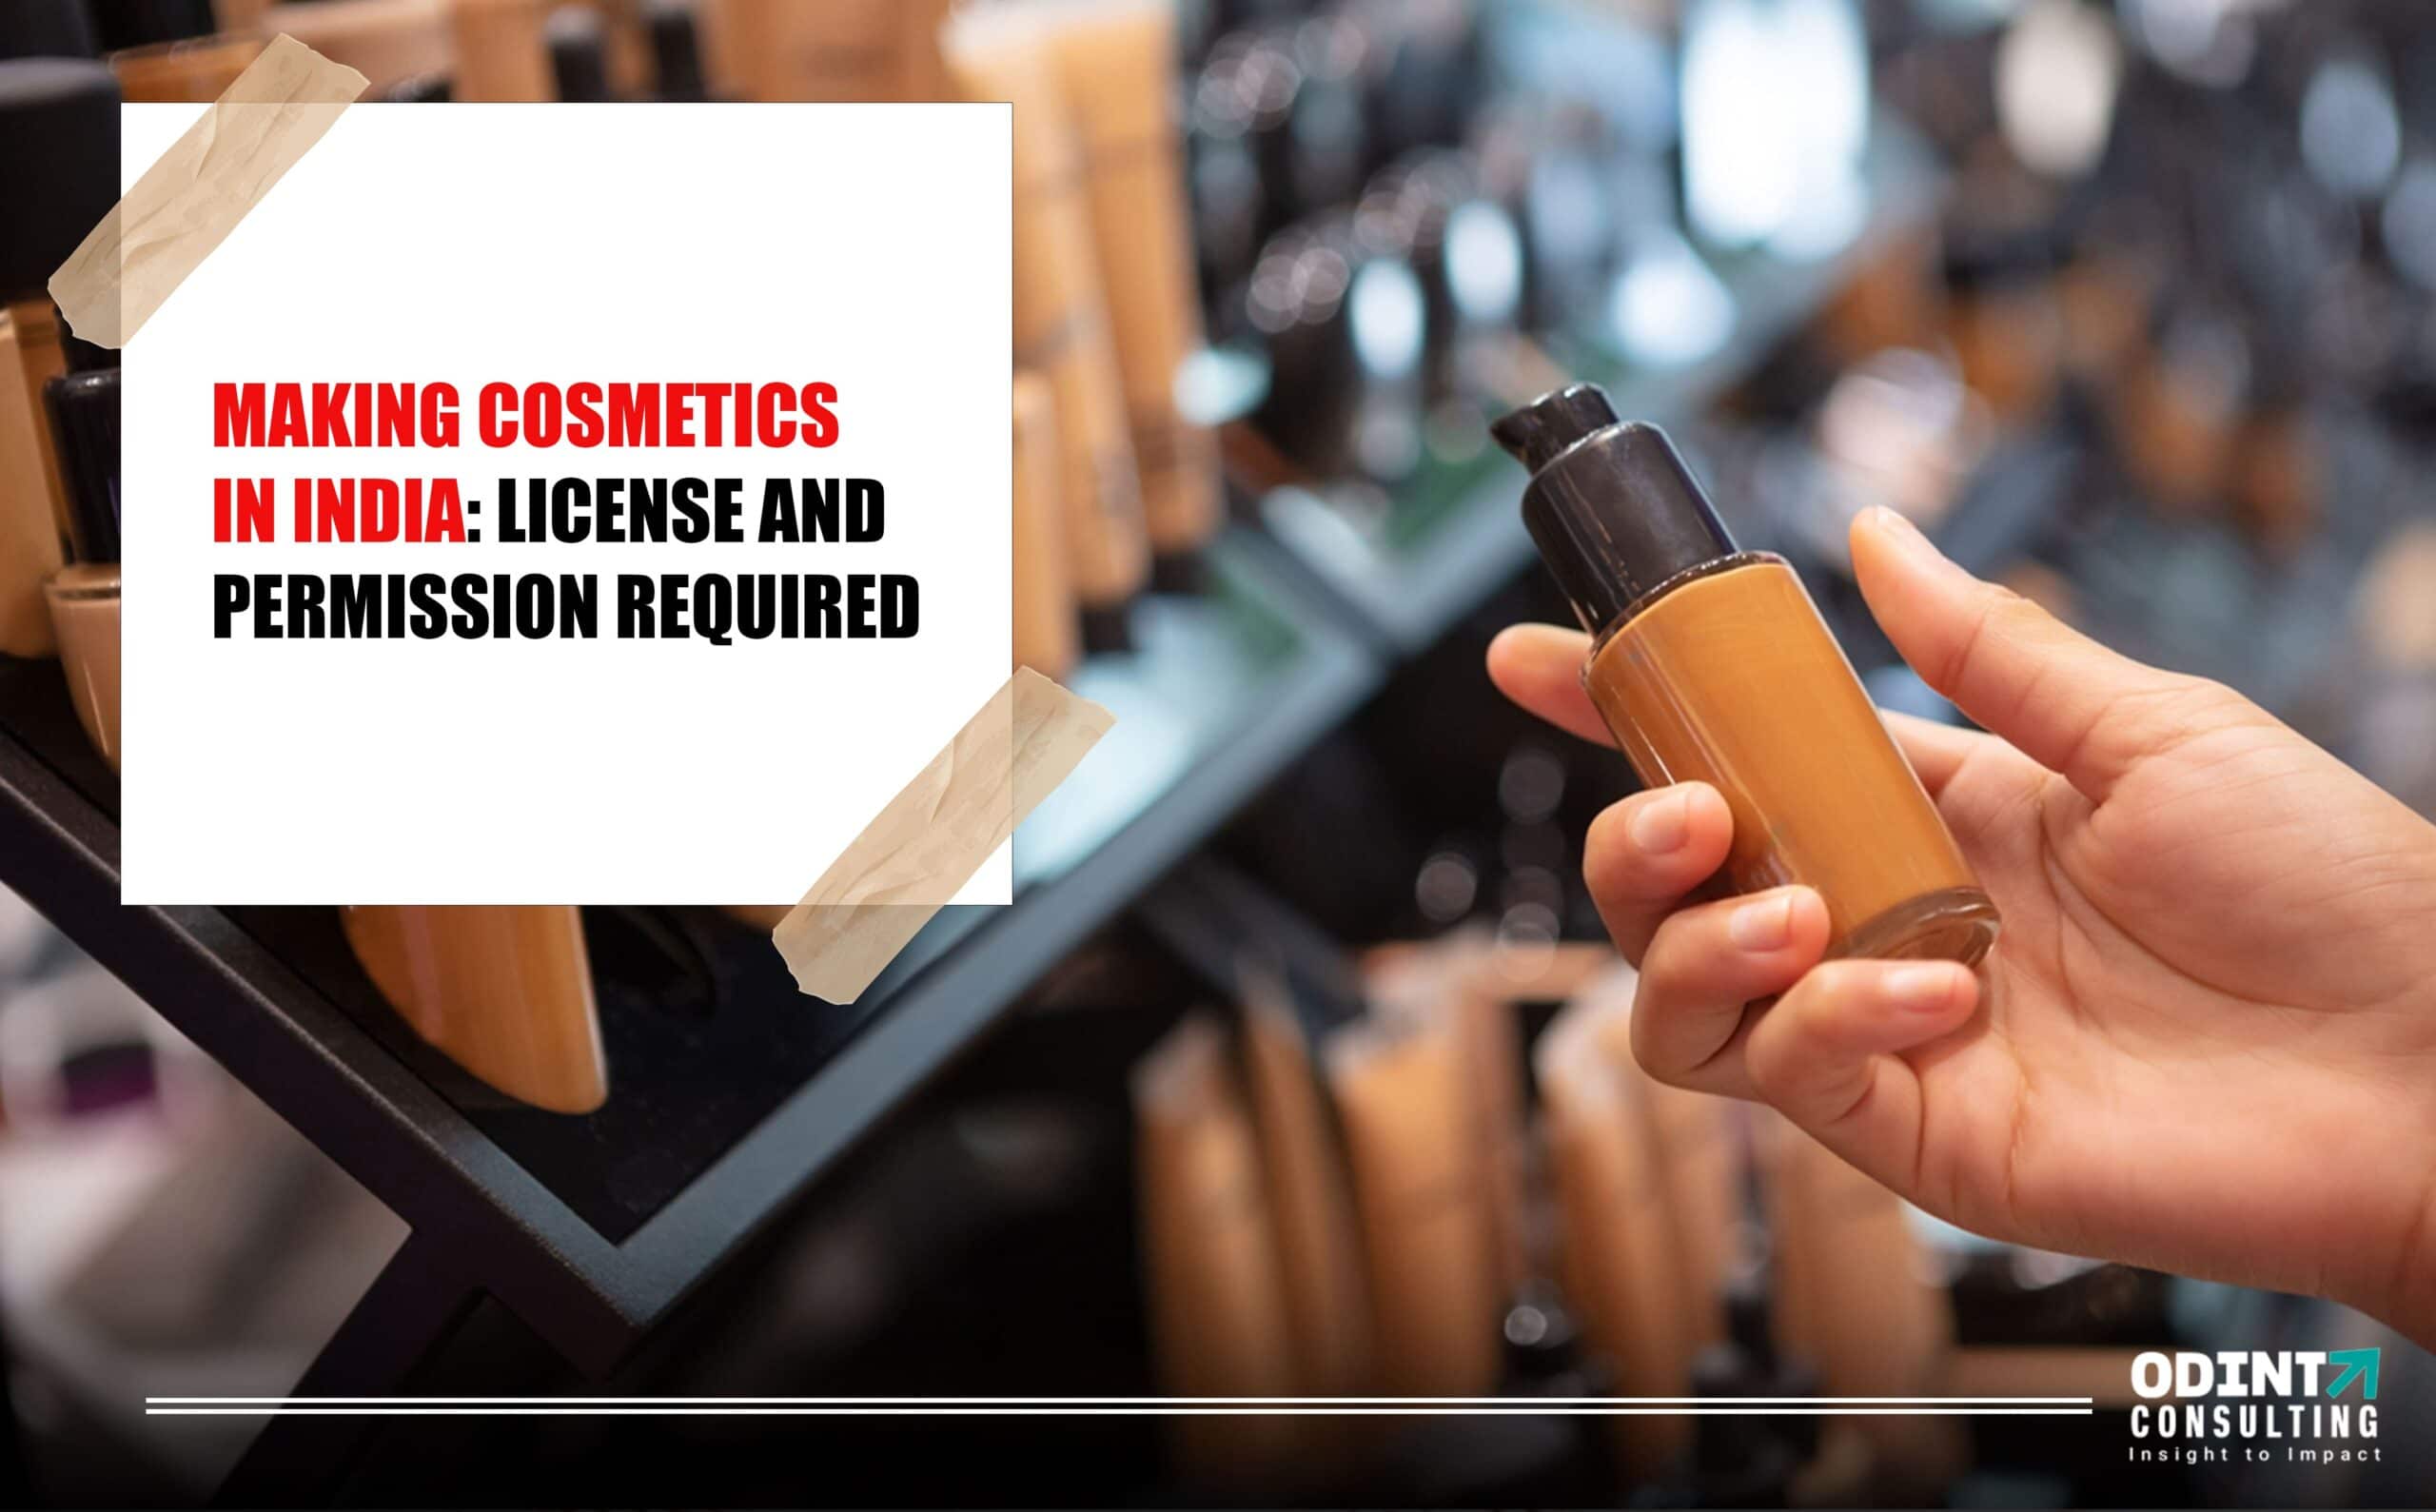 Making Cosmetics in India 2022: License and Permission Required